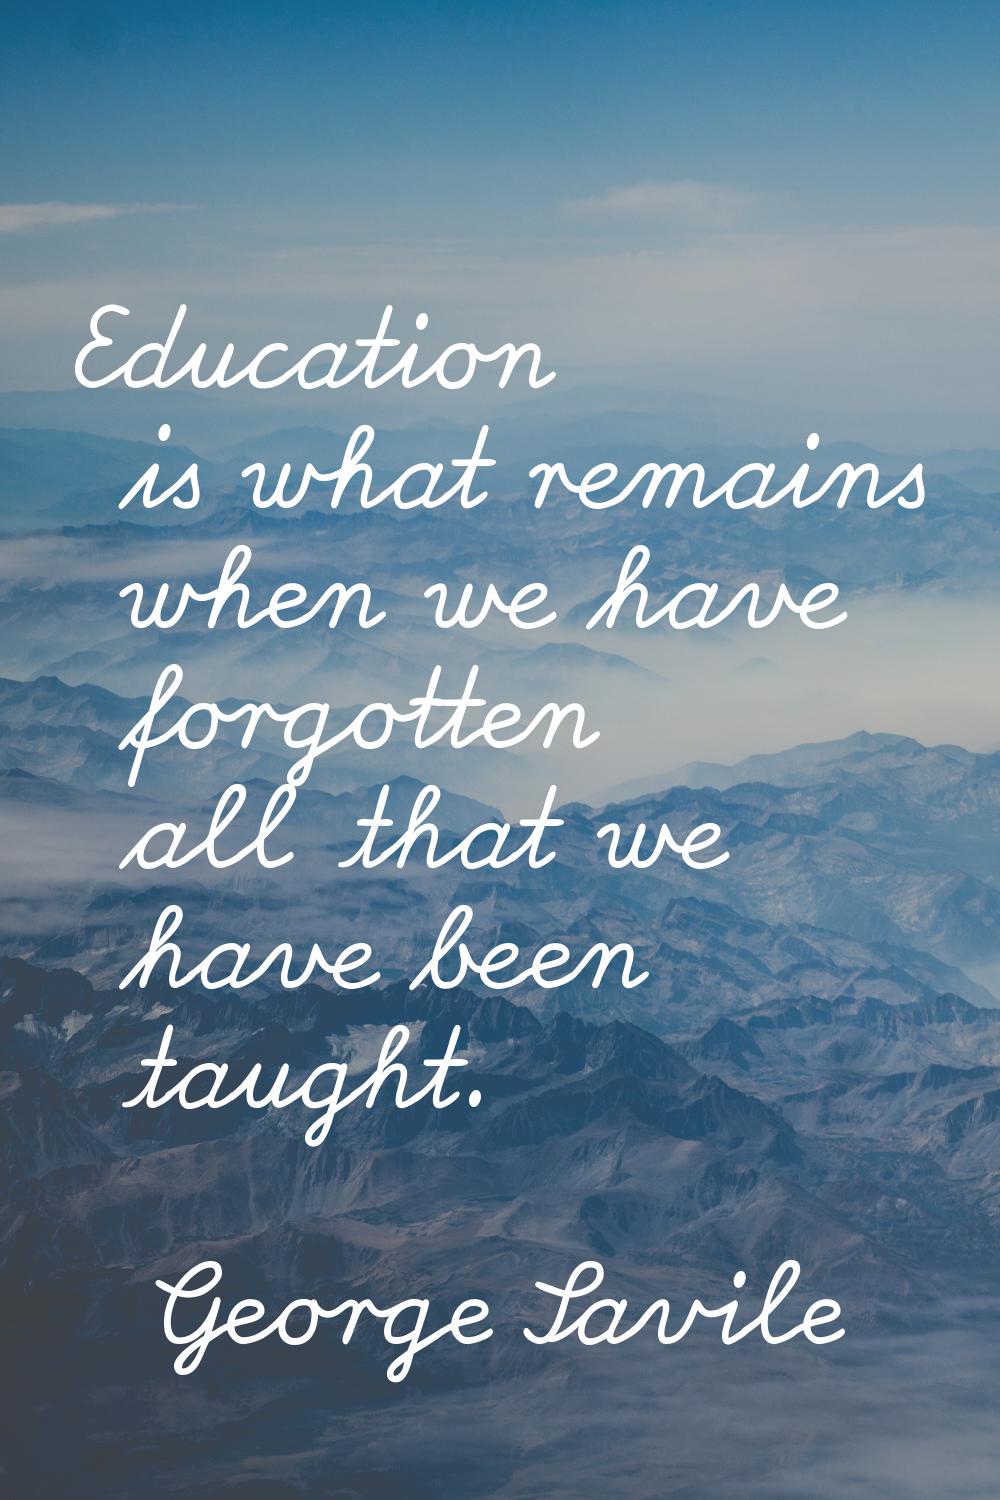 Education is what remains when we have forgotten all that we have been taught.